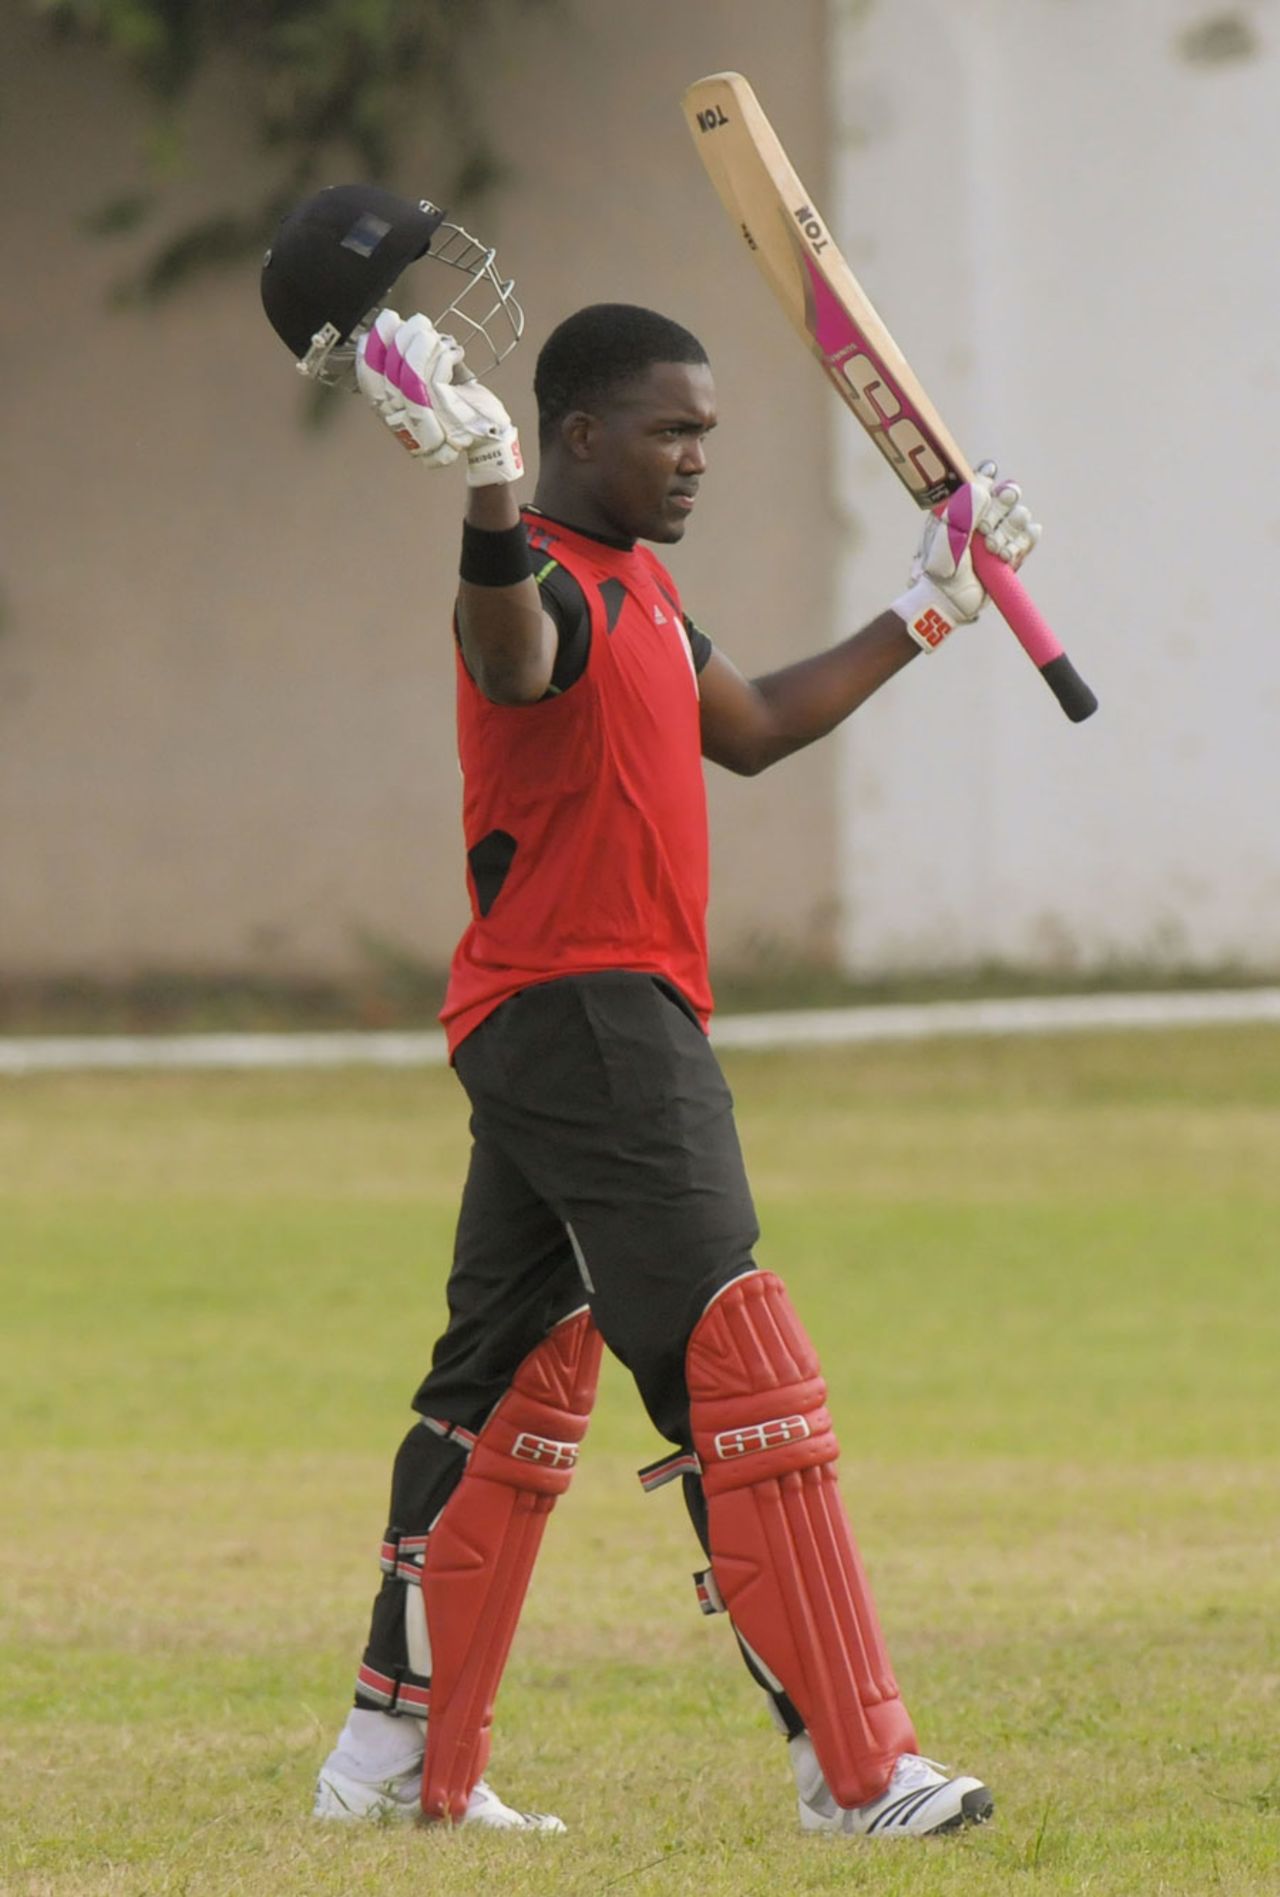 Darren Bravo celebrates his hundred, Combined Campuses and Colleges v Trinidad & Tobago, Group A match, WICB Cup, Kensington Park, Kingston, October 14, 2010